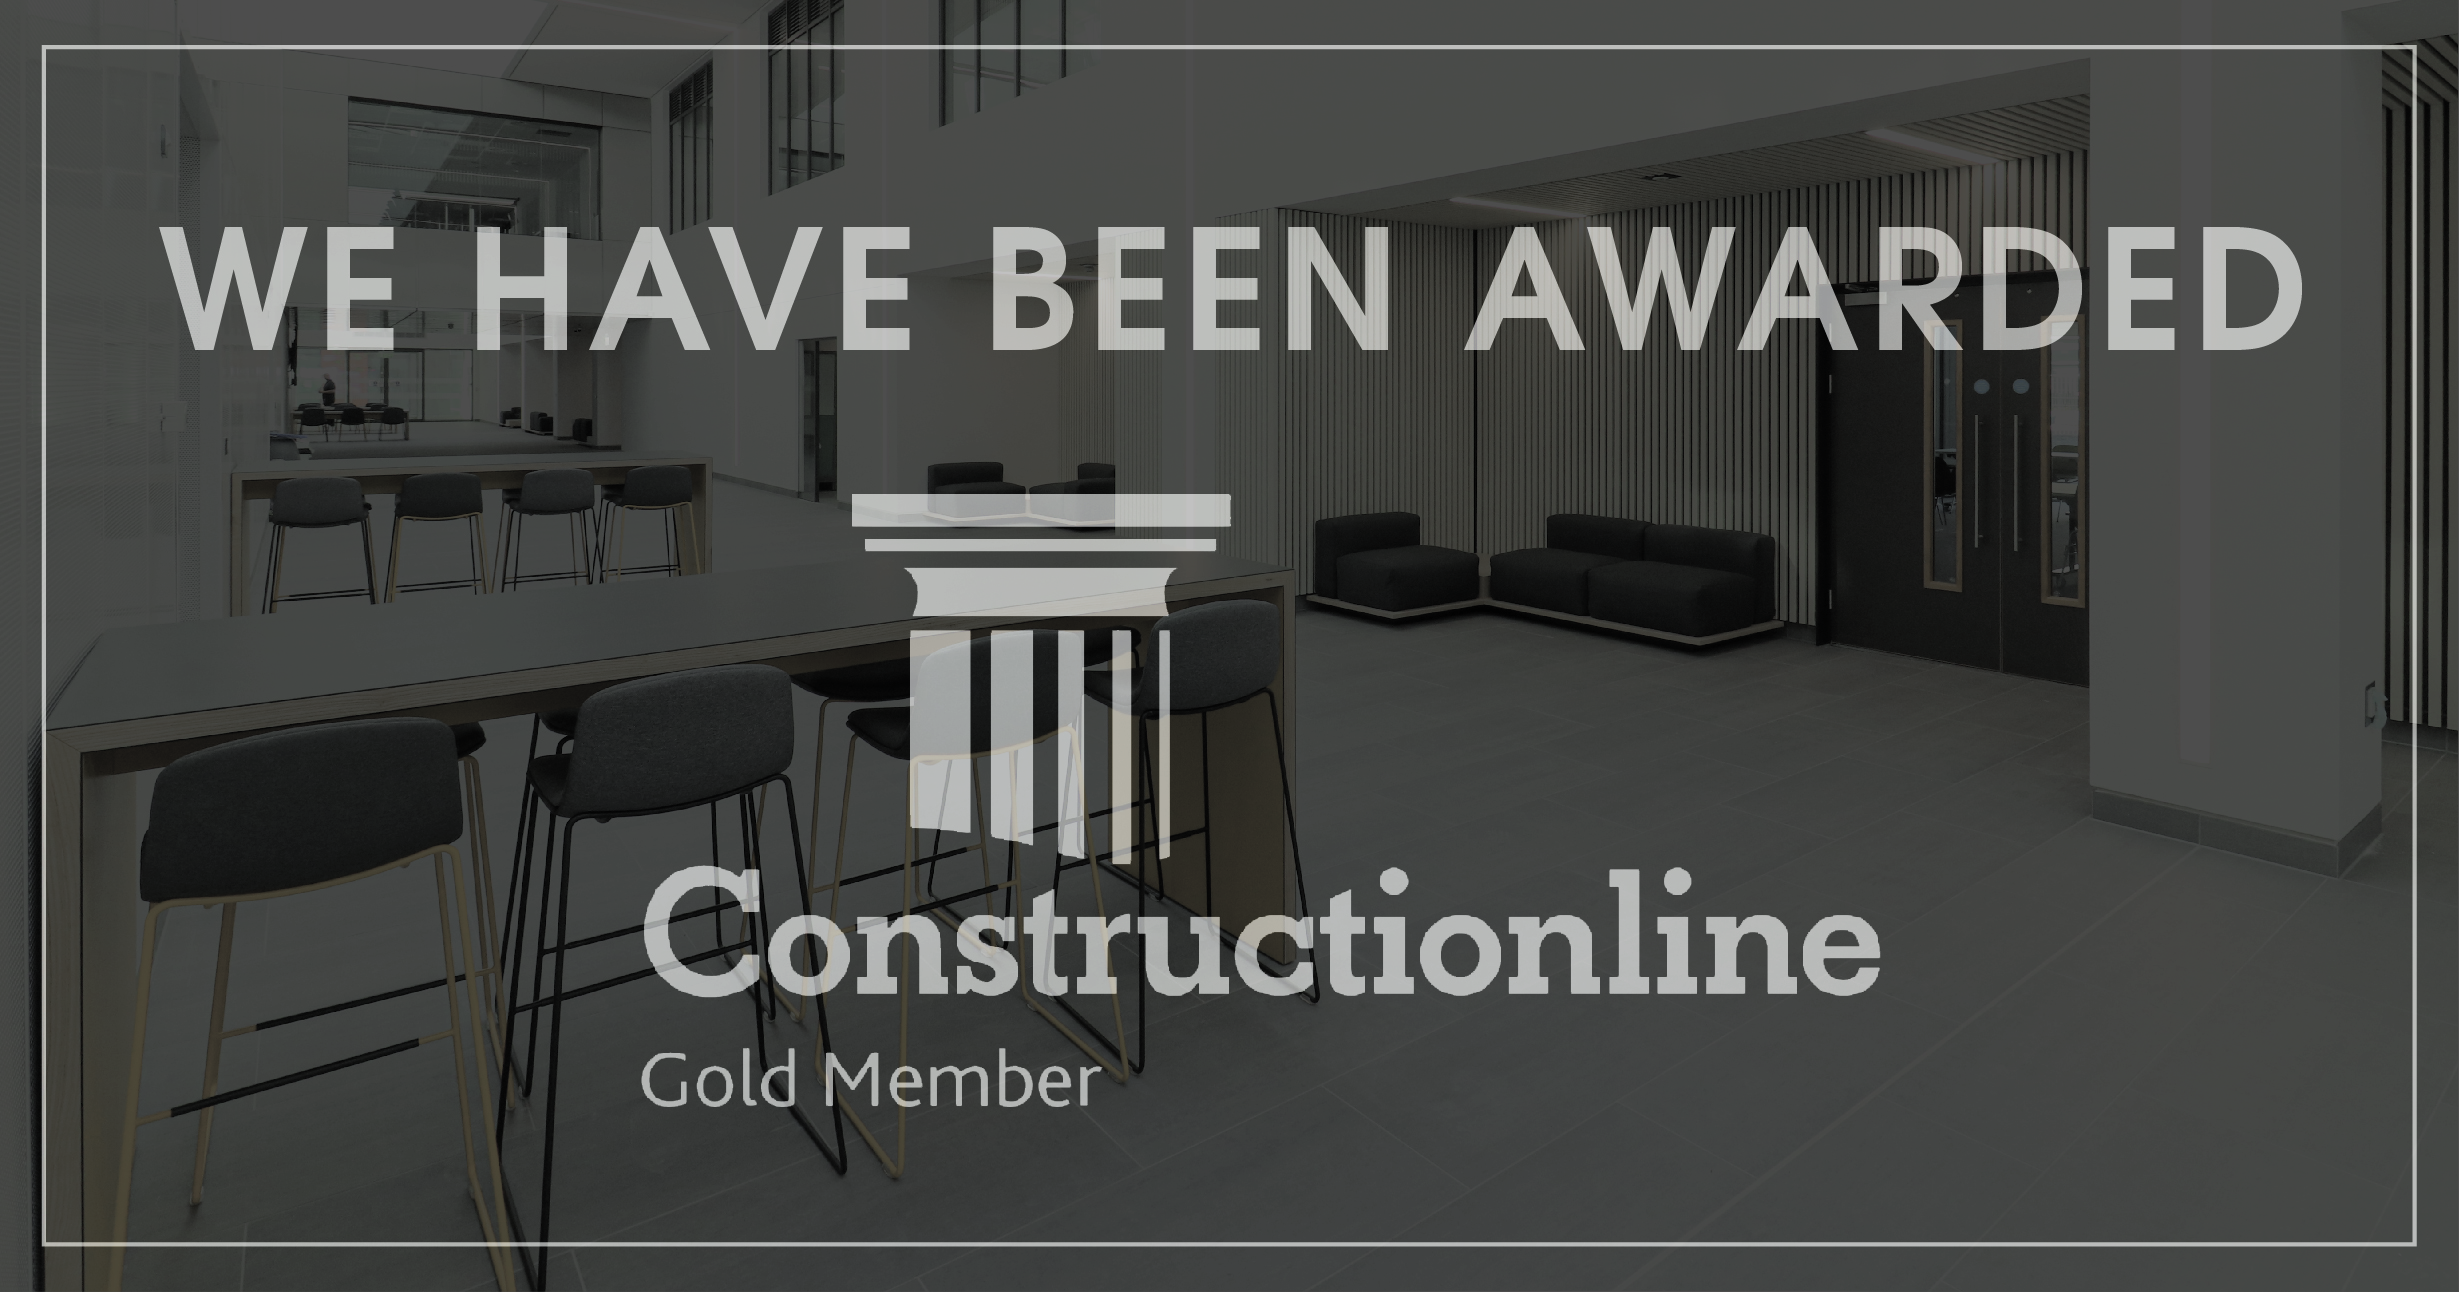 We have been awarded Constructionline Gold Membership